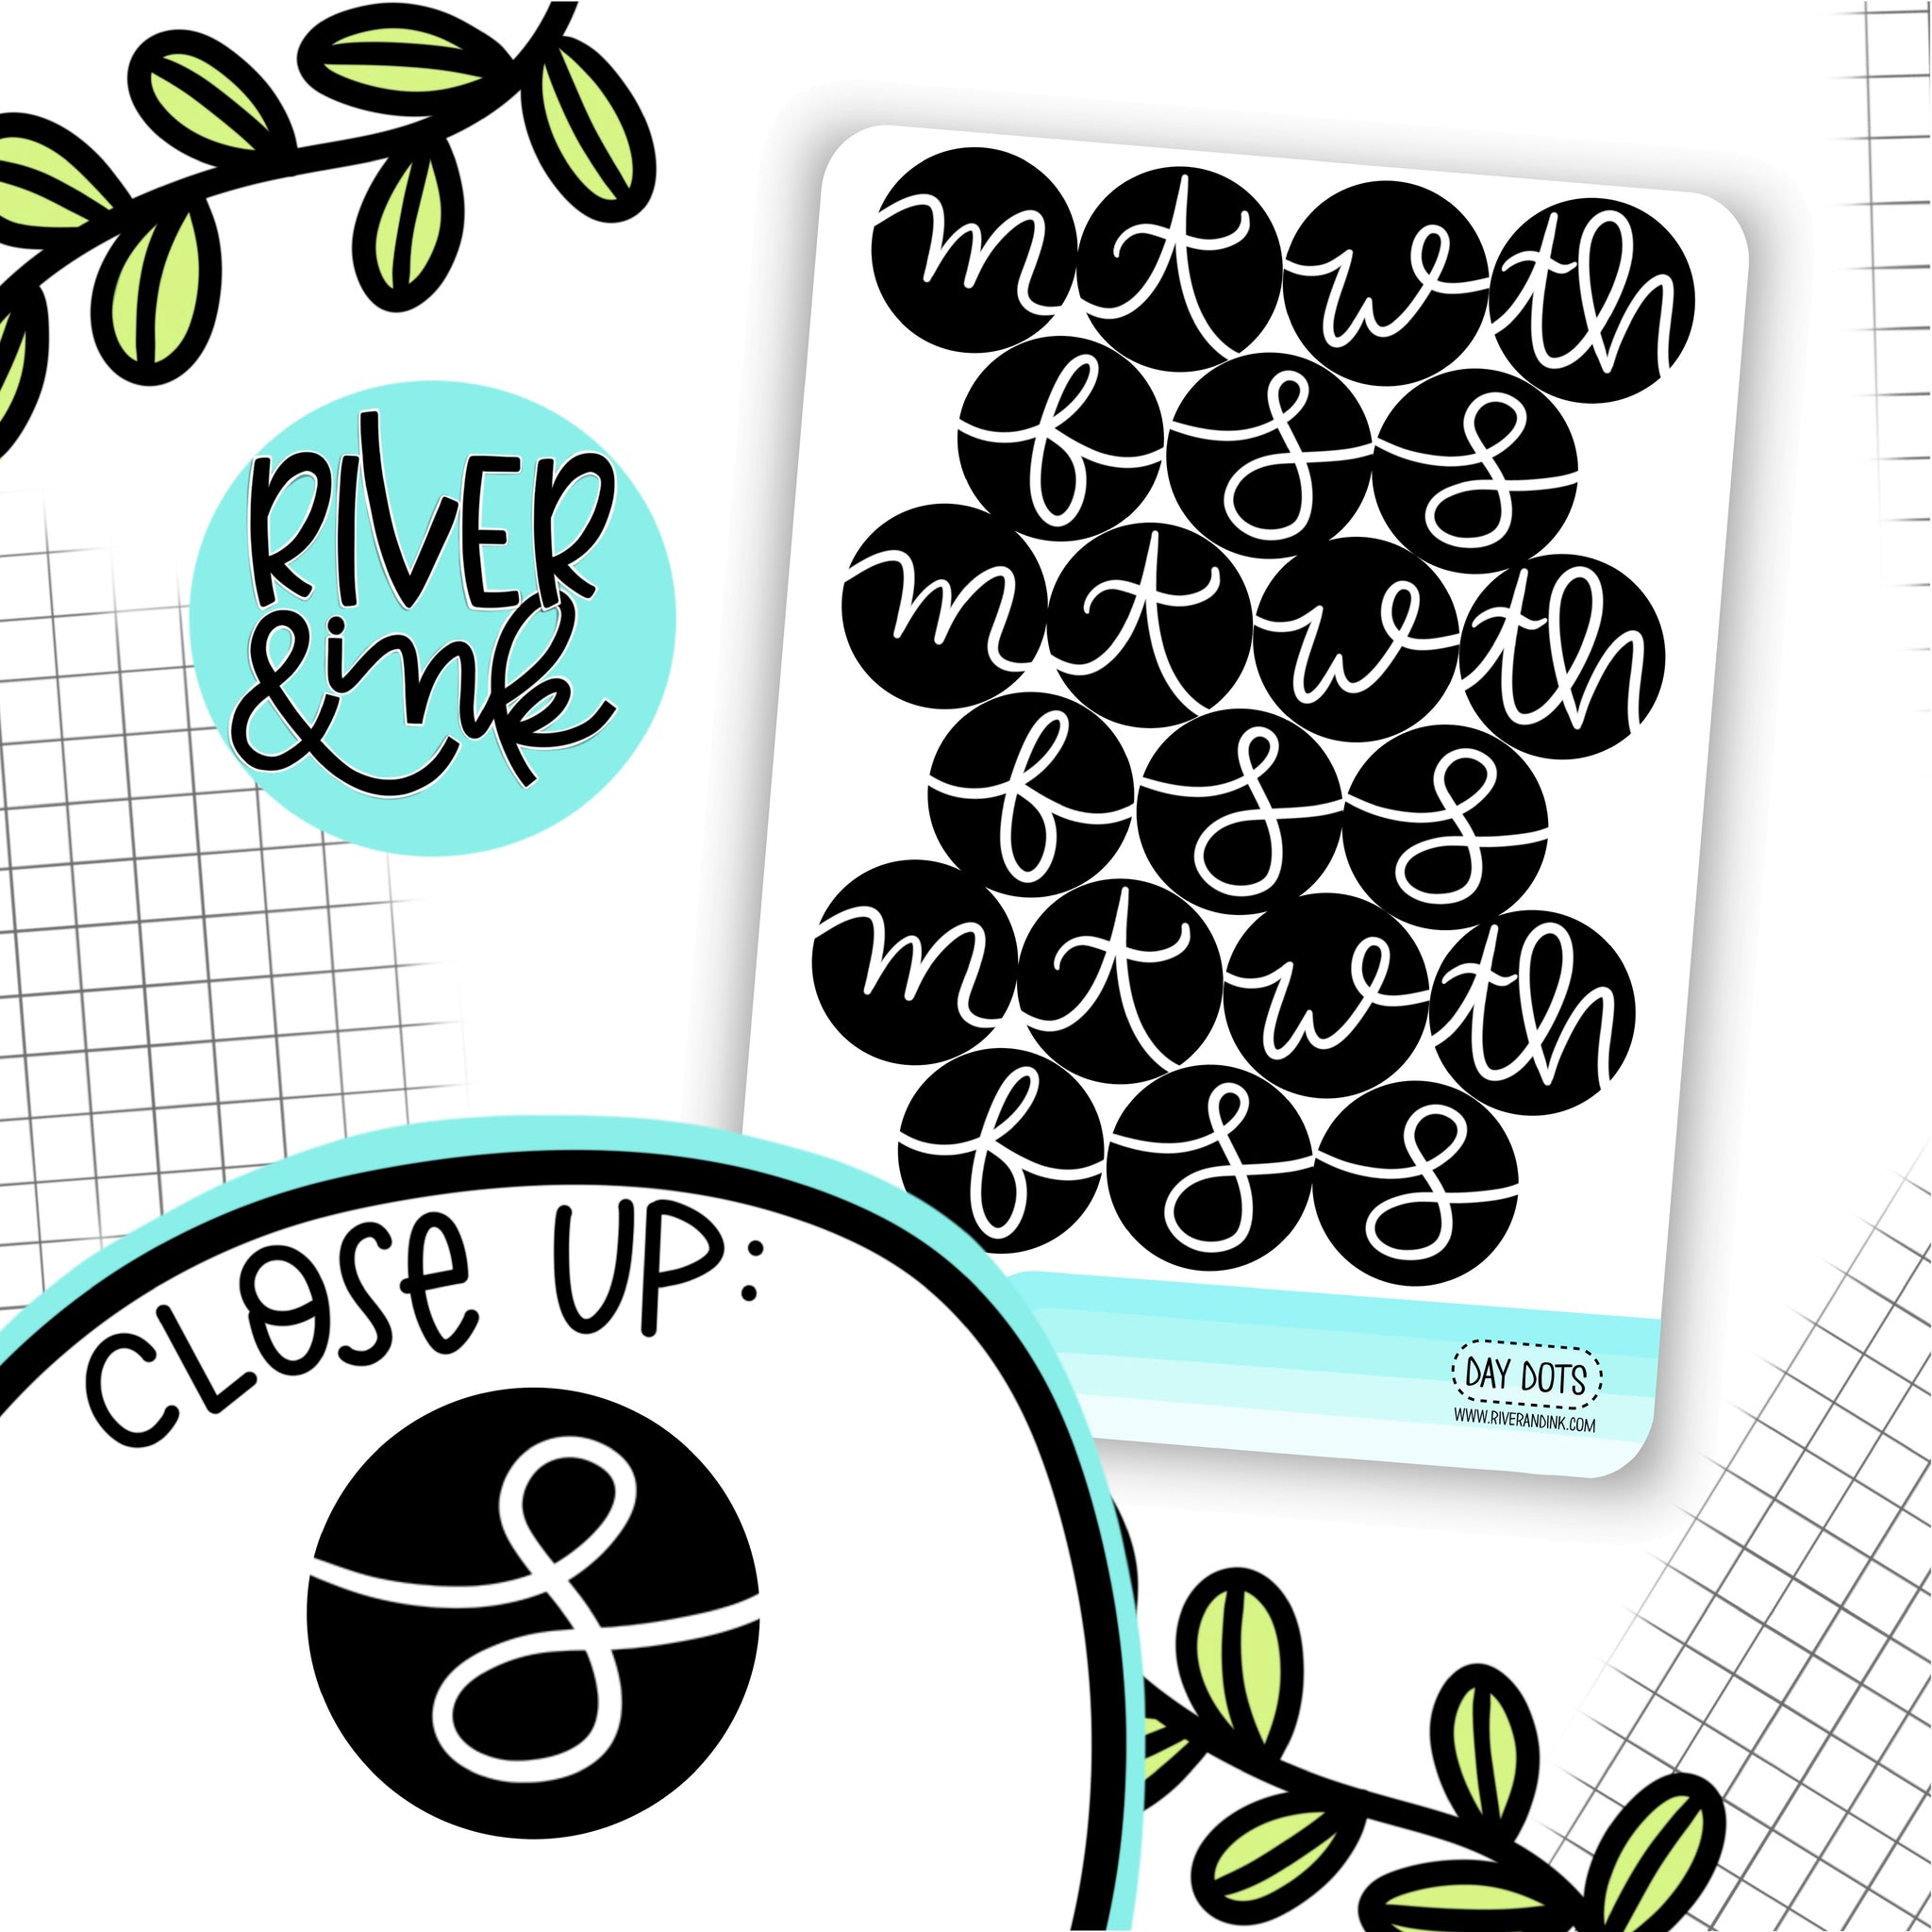 Day Dots Date Cover | Hand Lettered Planner Stickers